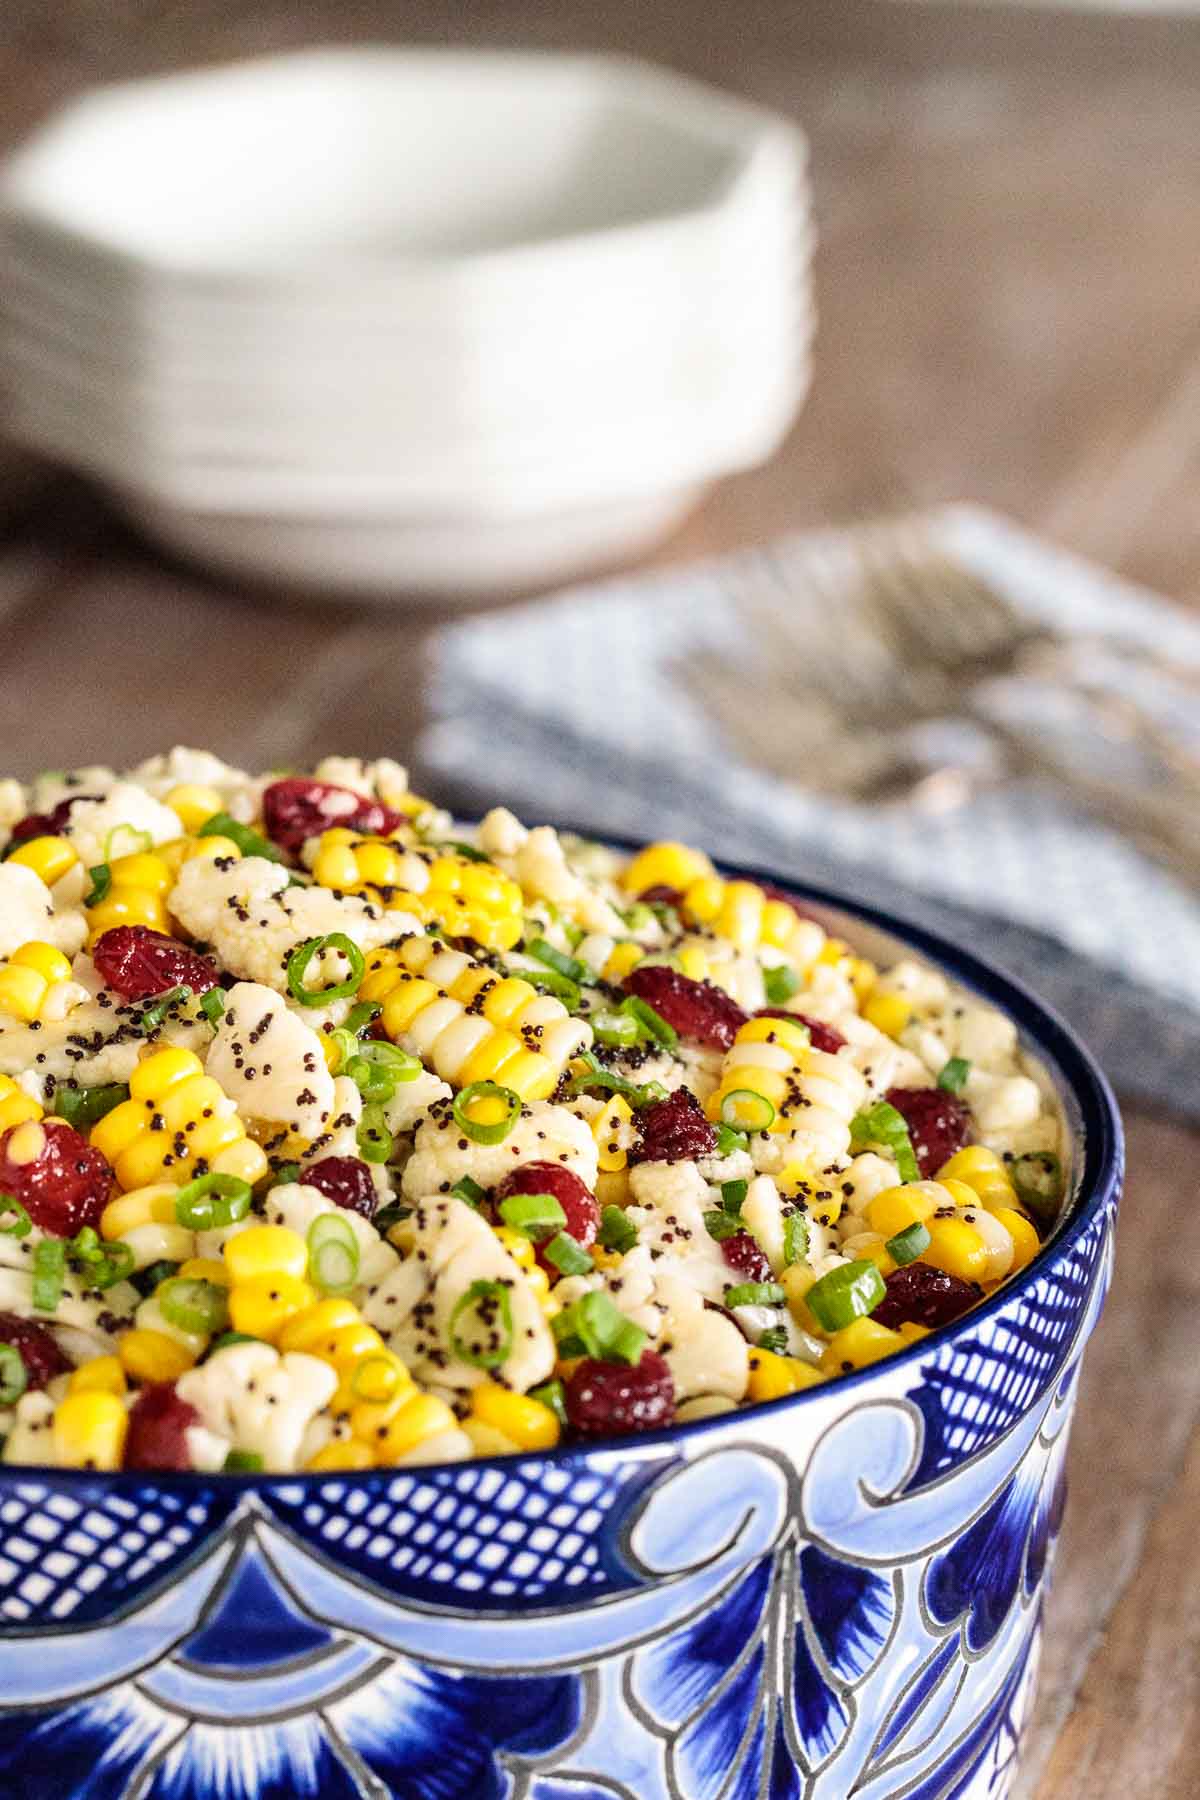 Photo of a serving bowl filled with Poppyseed Cauliflower and Fresh Corn Salad. Serving dishes, utensils and napkins are in the background.